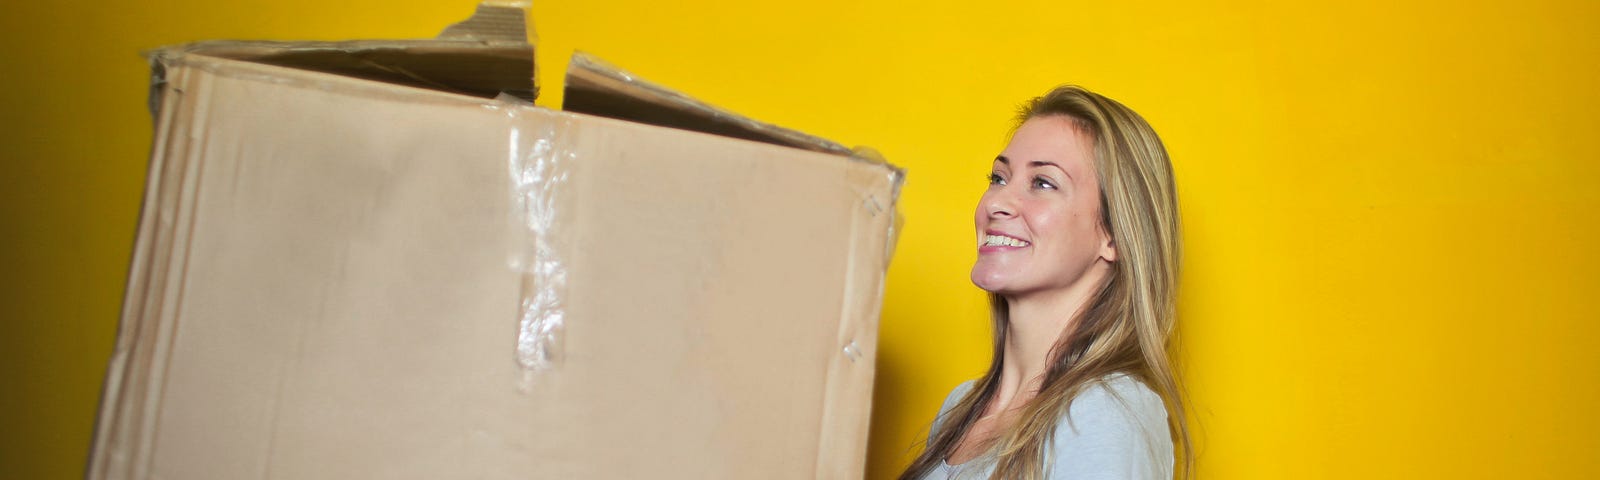 Woman In Grey Shirt Holding Brown Cardboard Box in front of a yellow wall.